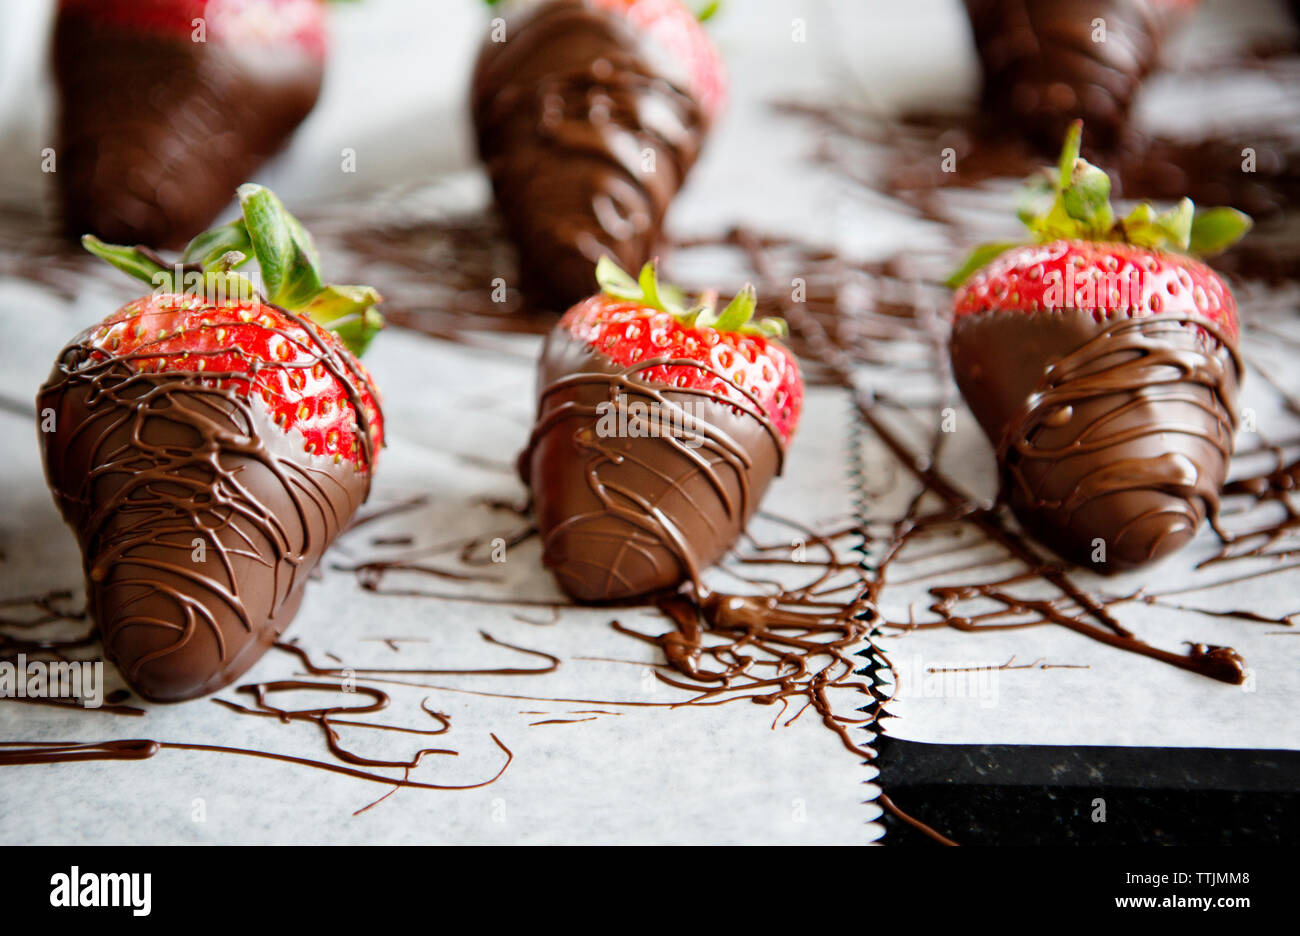 Close-up of strawberries dipped in chocolate Stock Photo